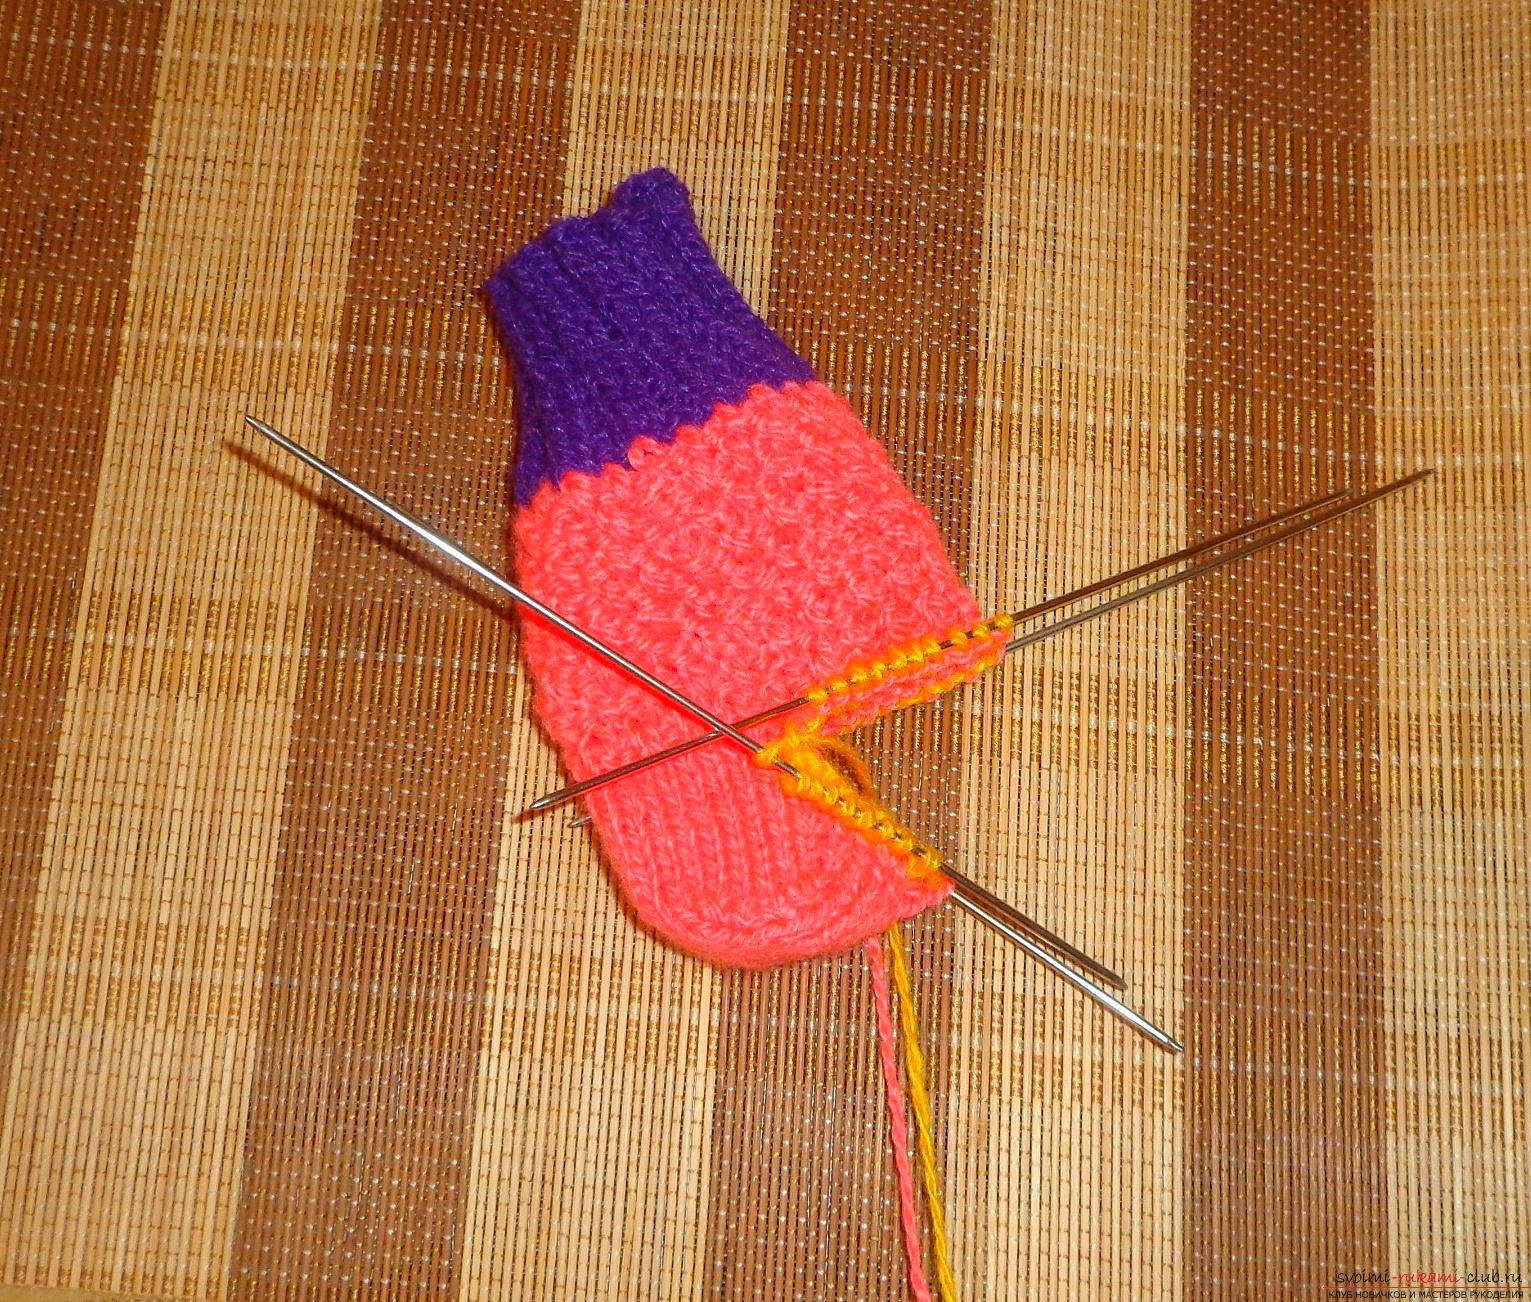 Photo to knitting lessons on knitting needles 